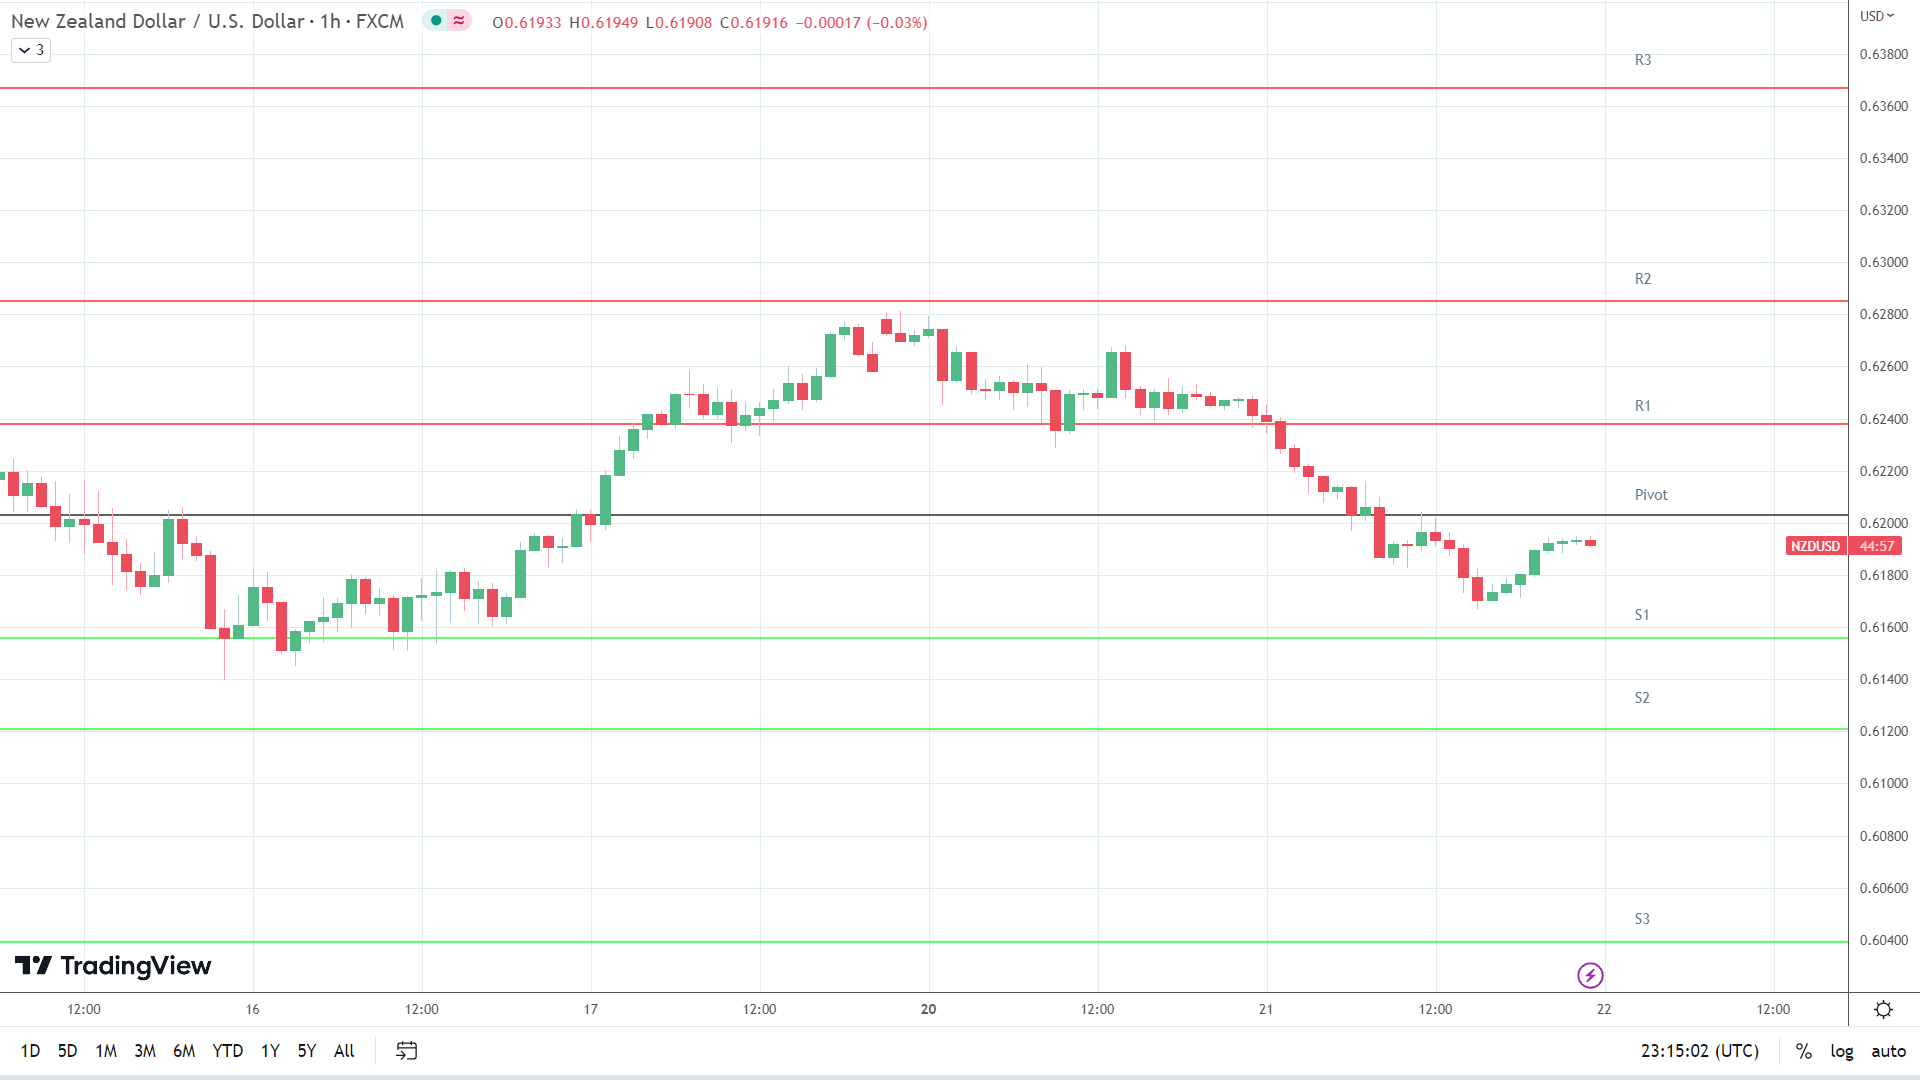 NZD/USD support levels in play below the pivot.